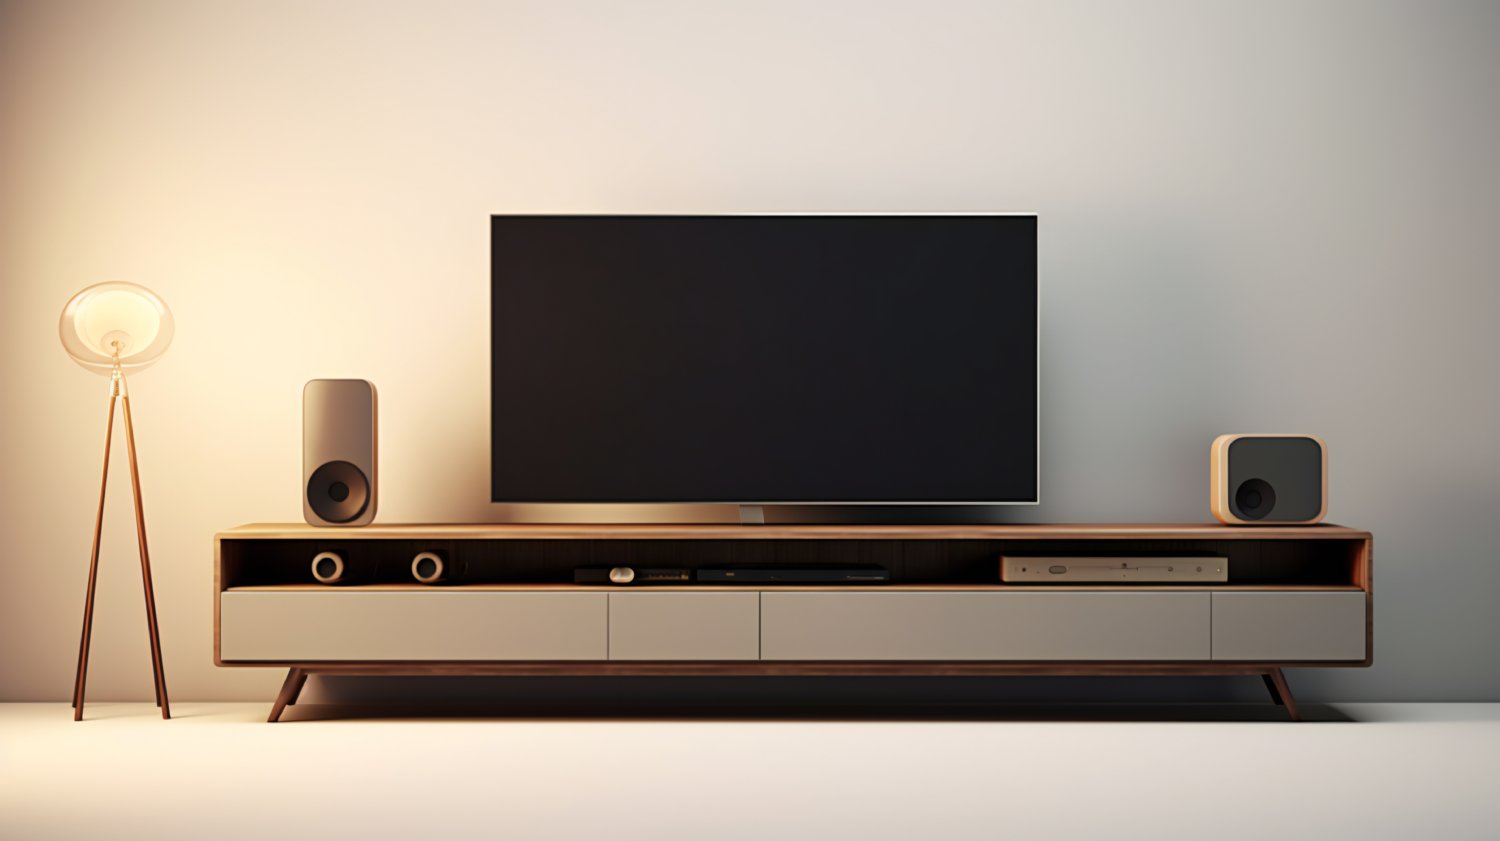 Home Surround System